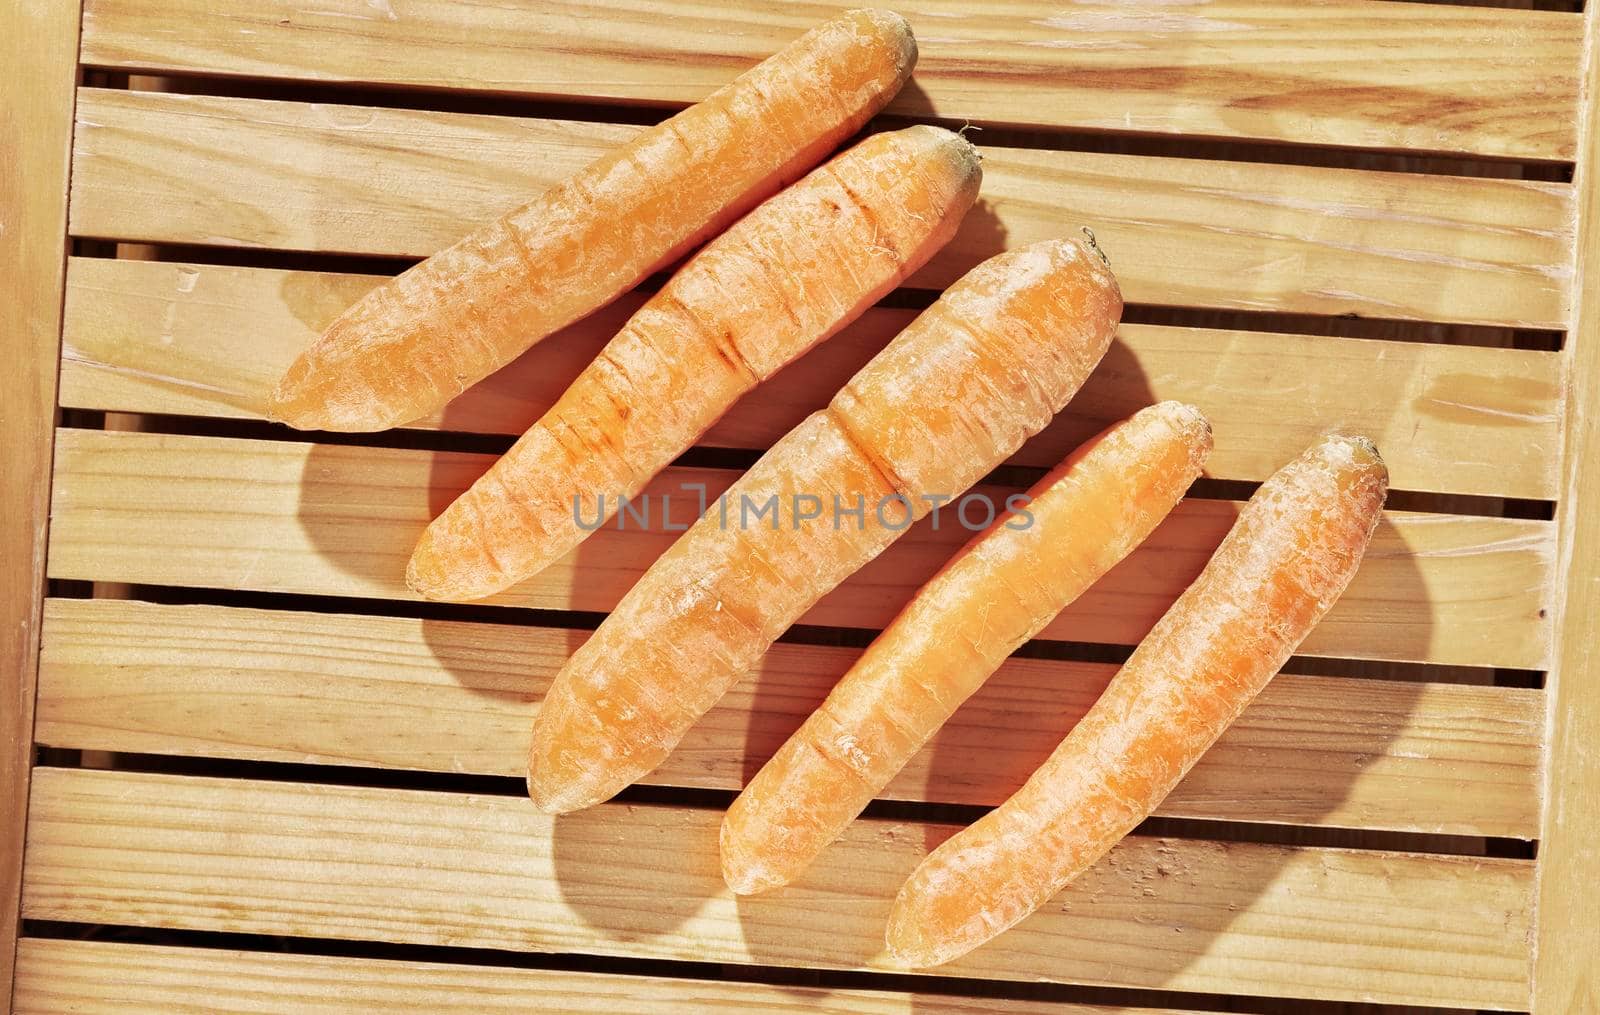 Carrots on wooden table by victimewalker